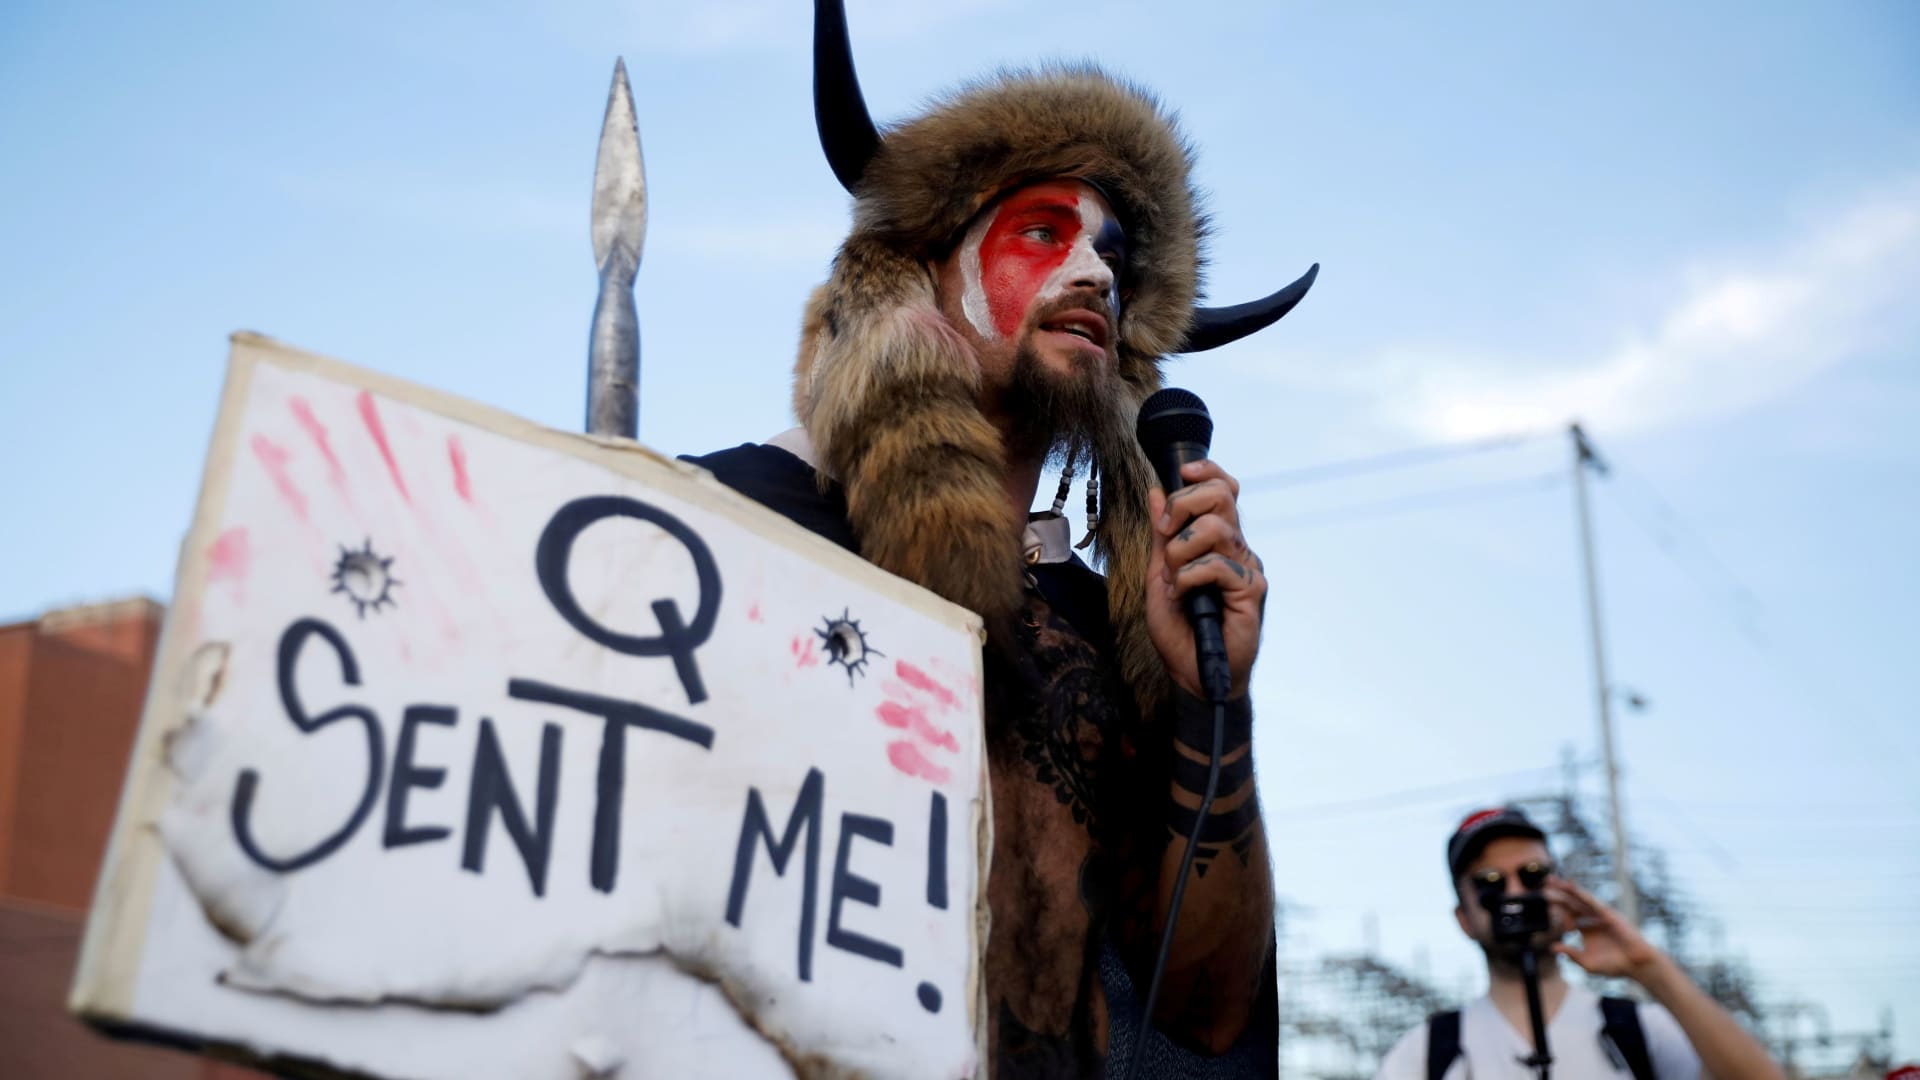 Jacob Chansley, holding a sign referencing QAnon, speaks as supporters of U.S. President Donald Trump gather to protest about the early results of the 2020 presidential election, in front of the Maricopa County Tabulation and Election Center (MCTEC), in Phoenix, Arizona November 5, 2020.